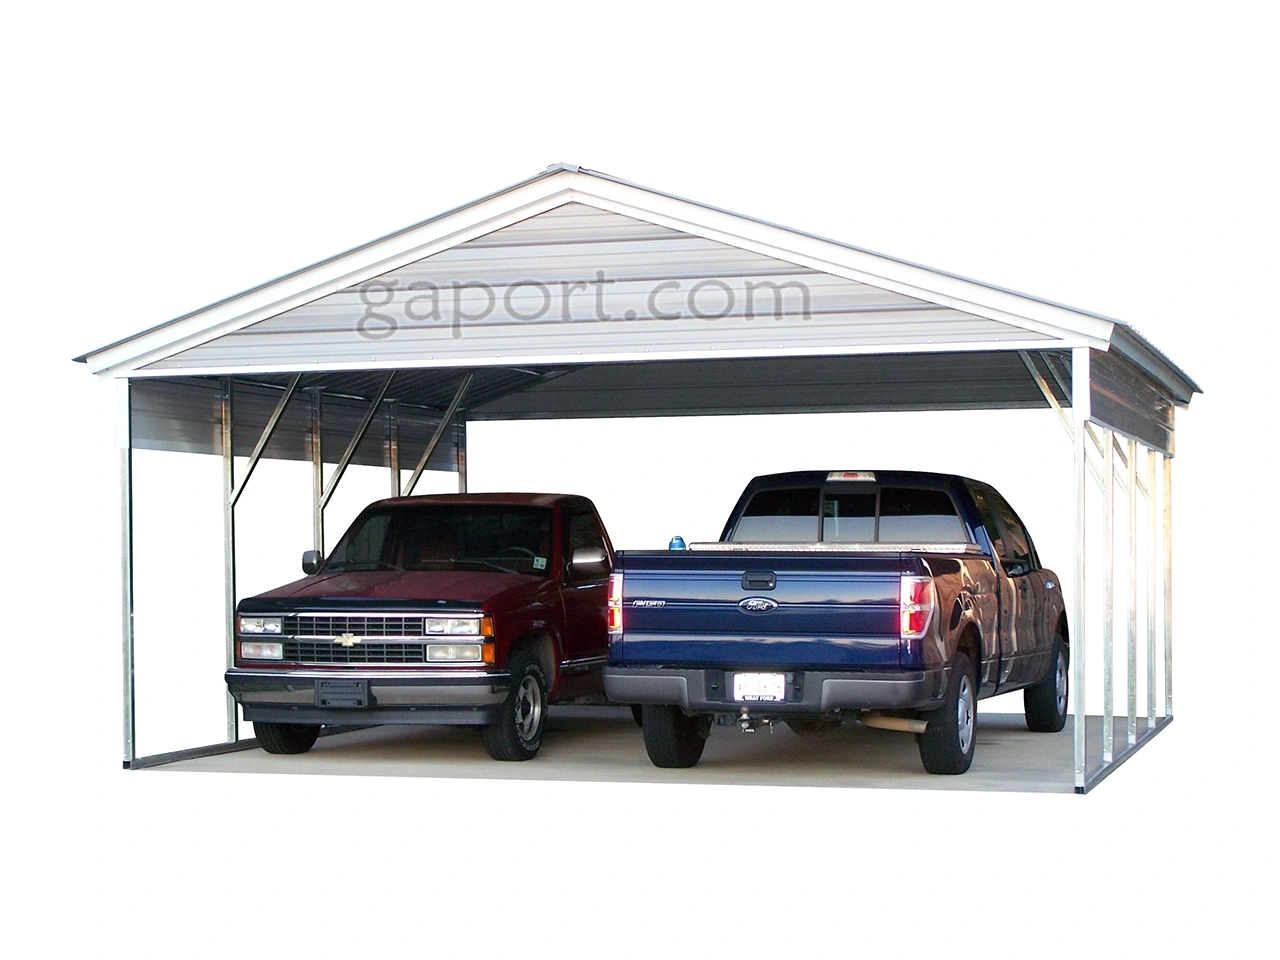 angled view of a gray car cover with a truck and car underneath